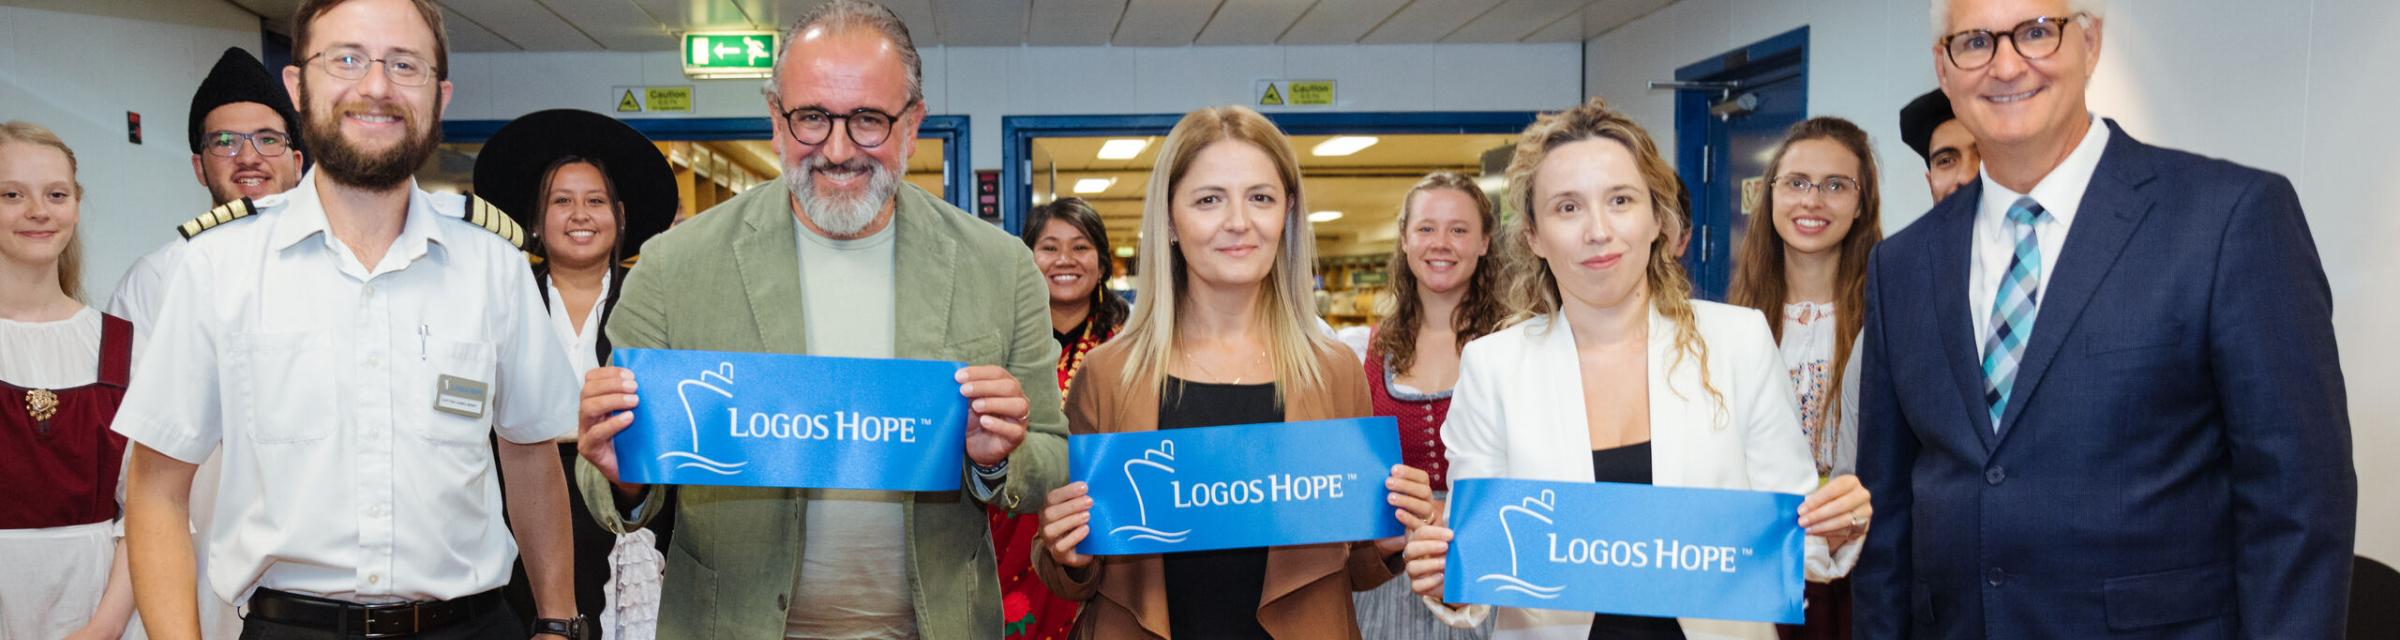 Vlore, Albania :: Mayor of Vlore, Vice Minister of tourism declare the opening of Logos Hope officially in Vlore by cutting the ribbon.